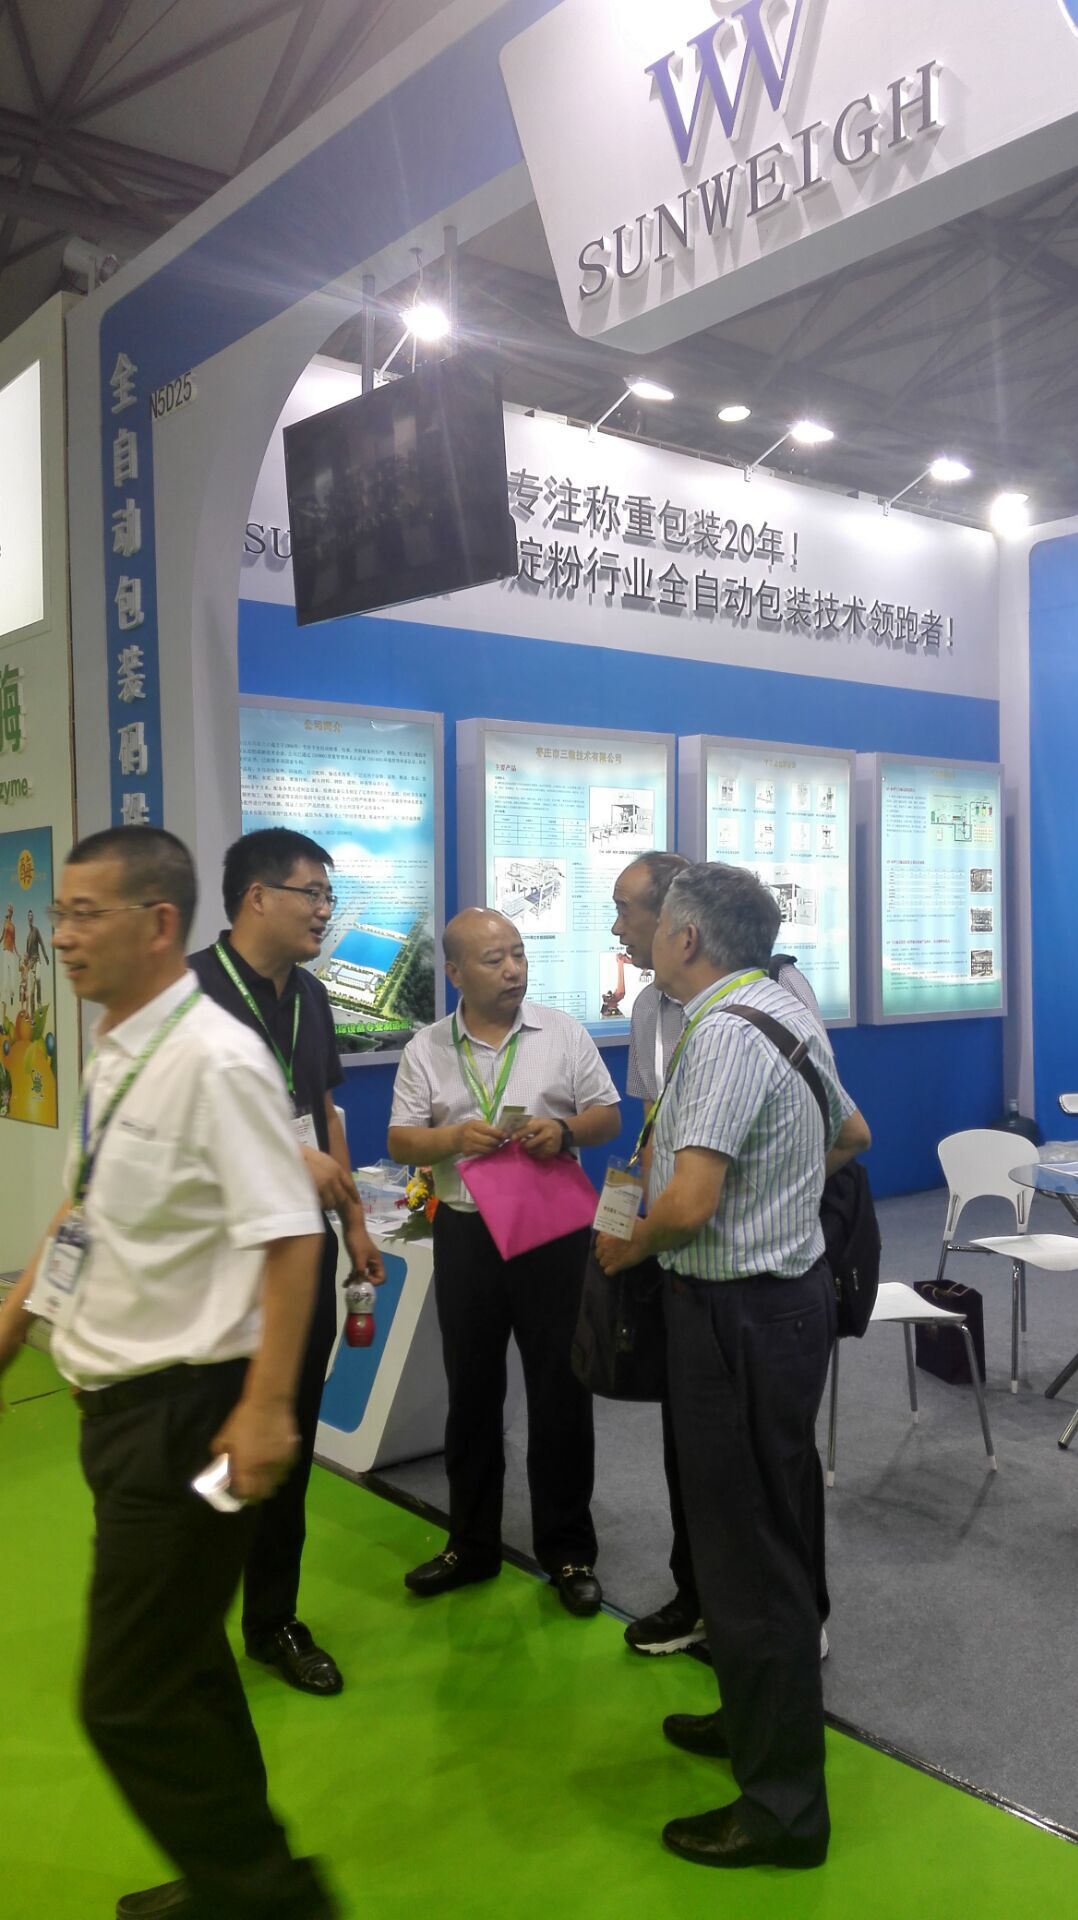 Warmly celebrate the successful participation of Zaozhuang Sunweigh Technology Co., Ltd. in